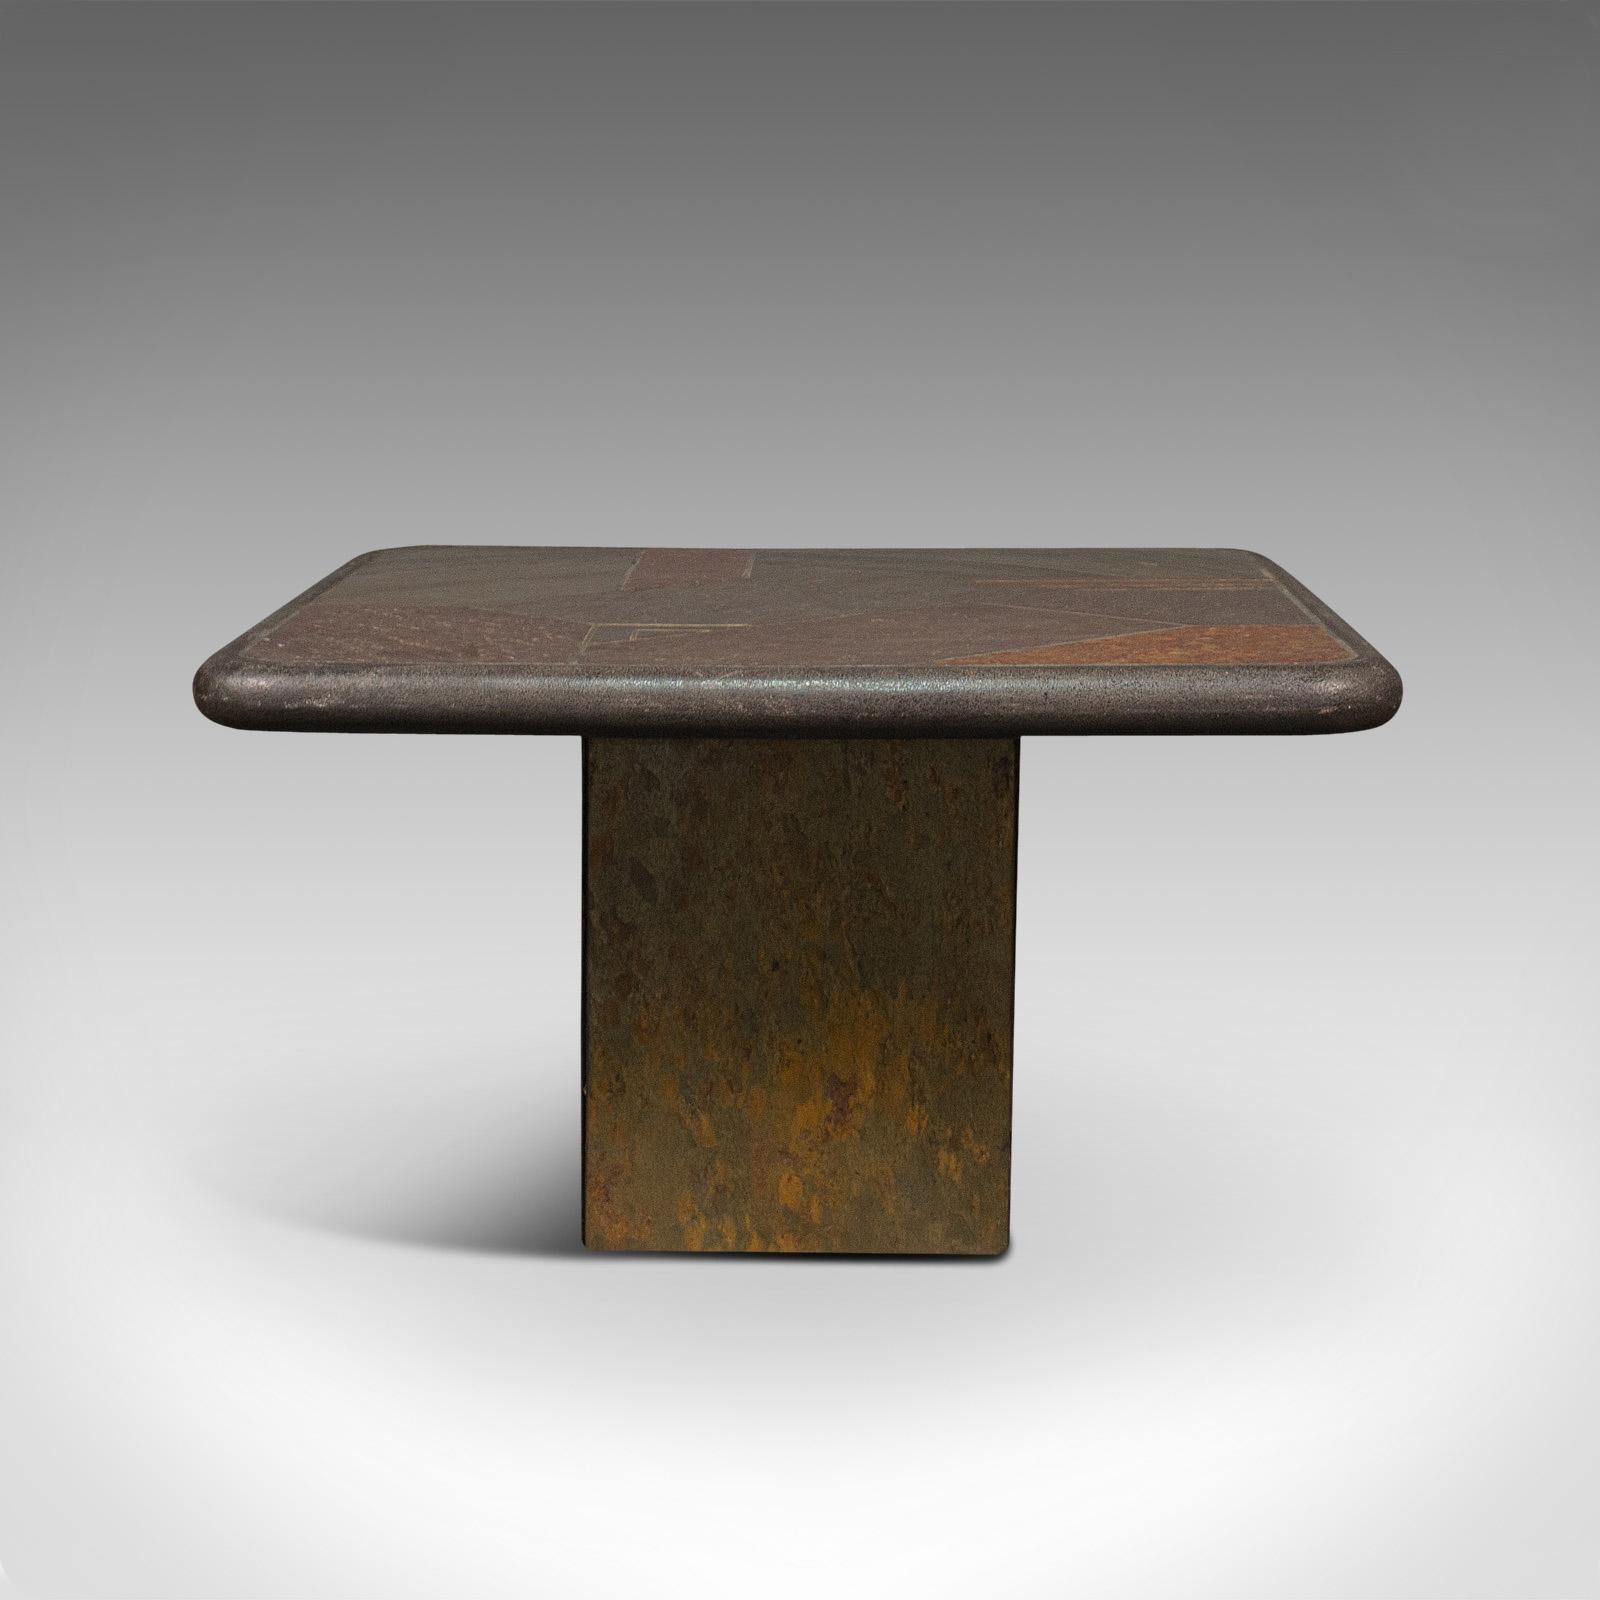 This is a vintage designer coffee table. A Dutch, slate and brass brutalist artwork from the Tableaux series by Paul Kingma, dating to the late 20th century, circa 1980.

Superb opportunity to grace your living room with a Kingma piece
Displays a